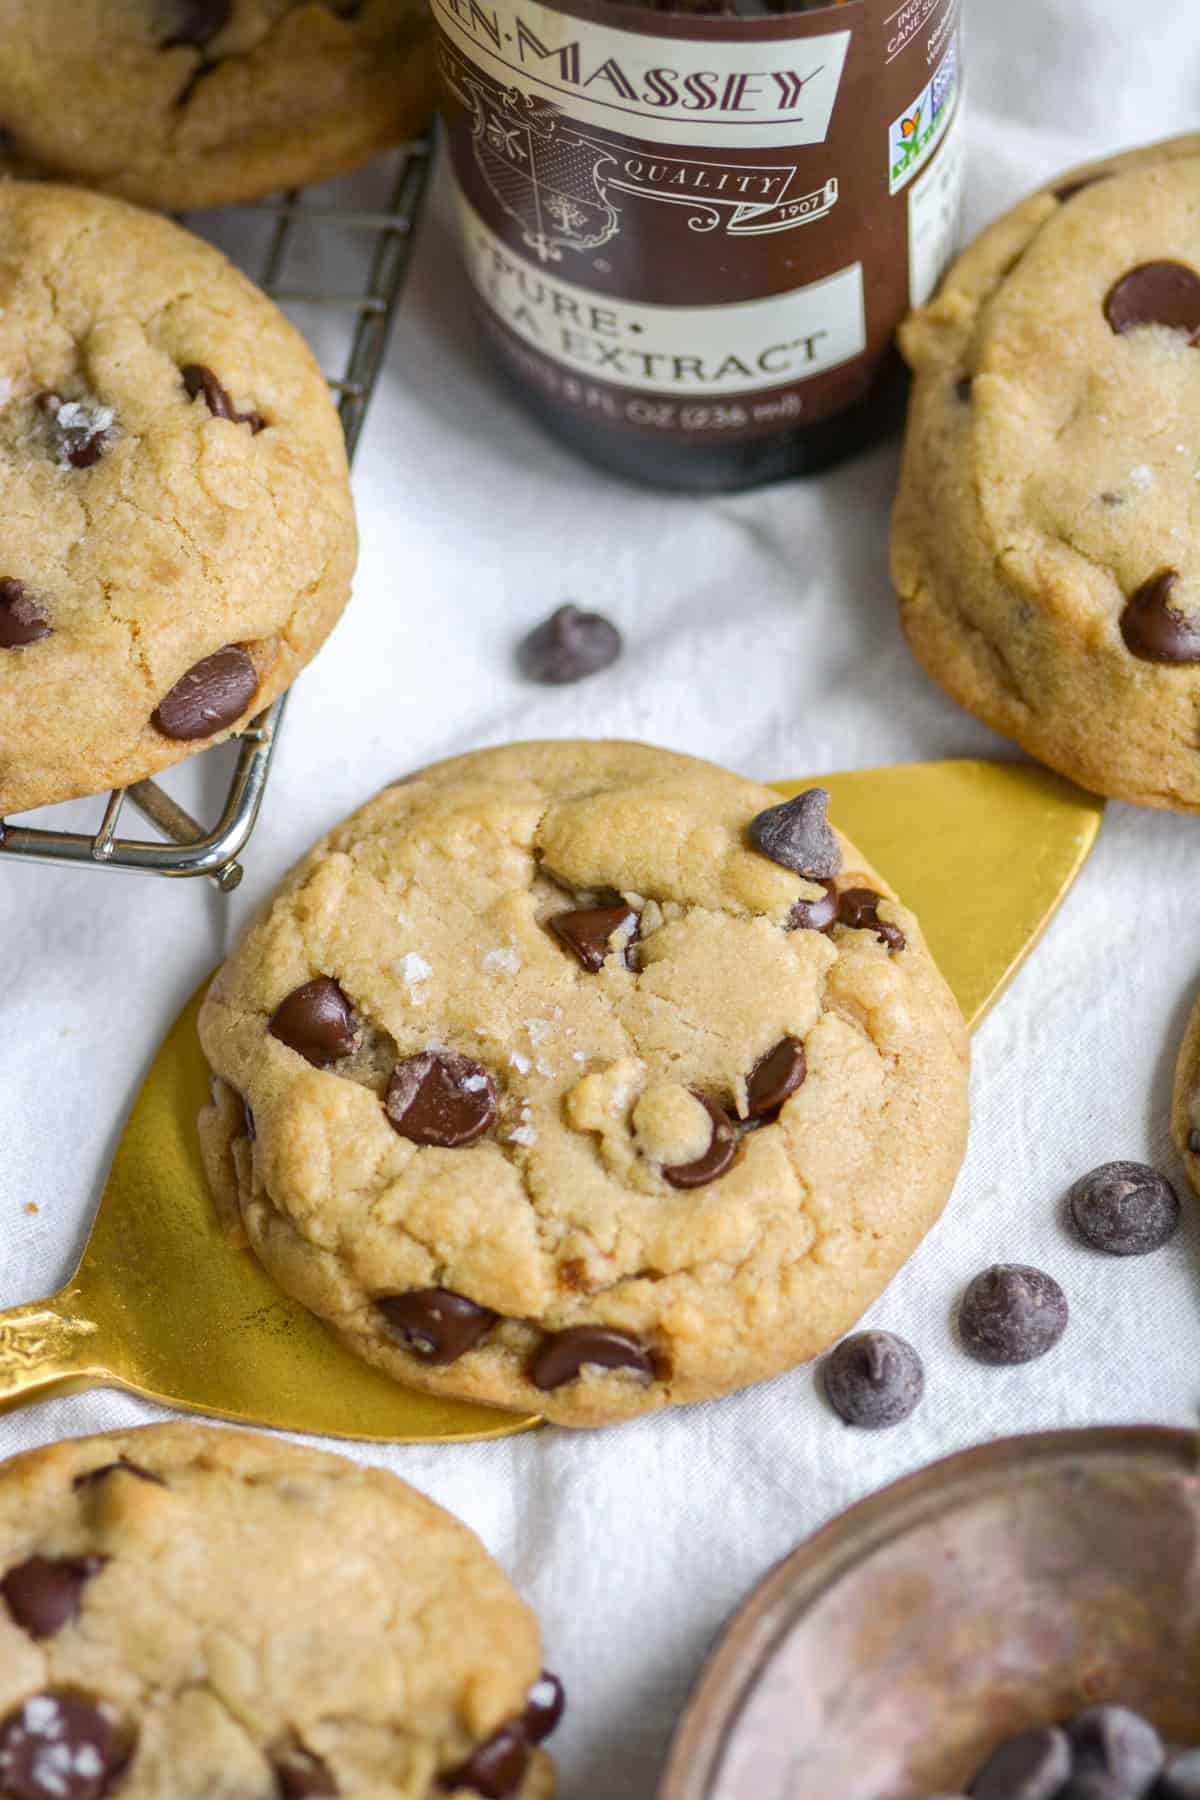 A cookie on a gold cake server with chocolate chips and more cookies in the scene.